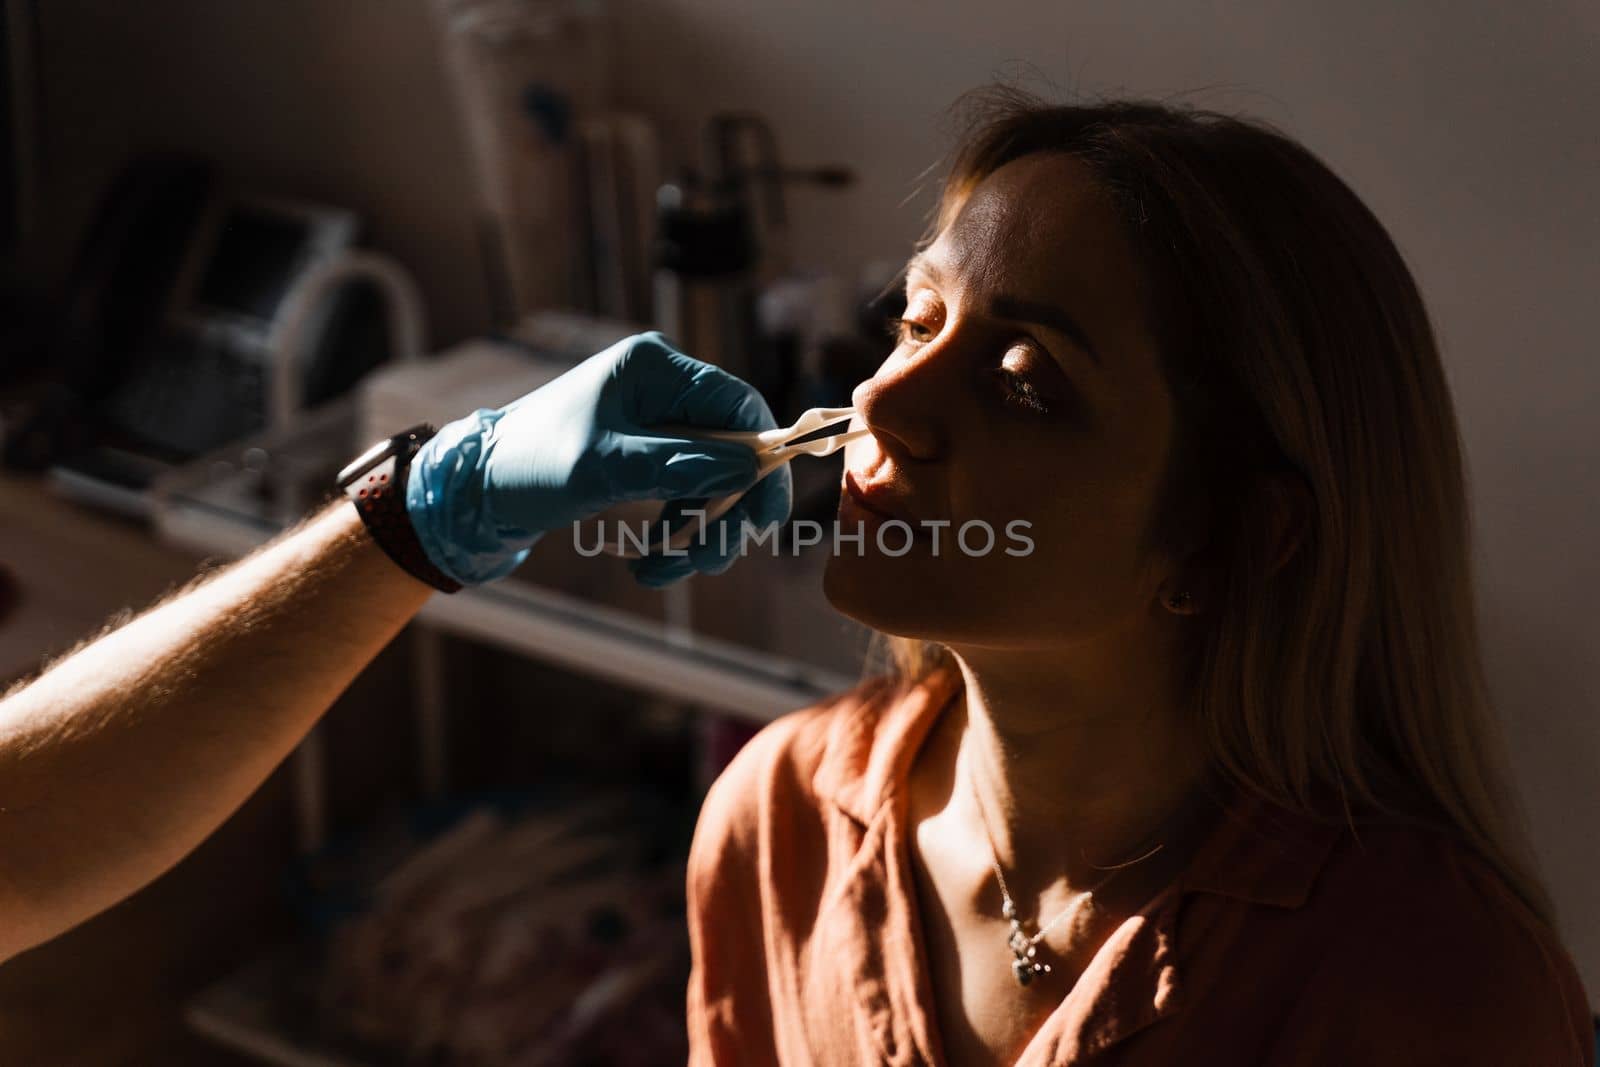 Rhinoscopy of woman nose. Consultation with doctor. Otolaryngologist examines girl nose before procedure of endoscopy of nose